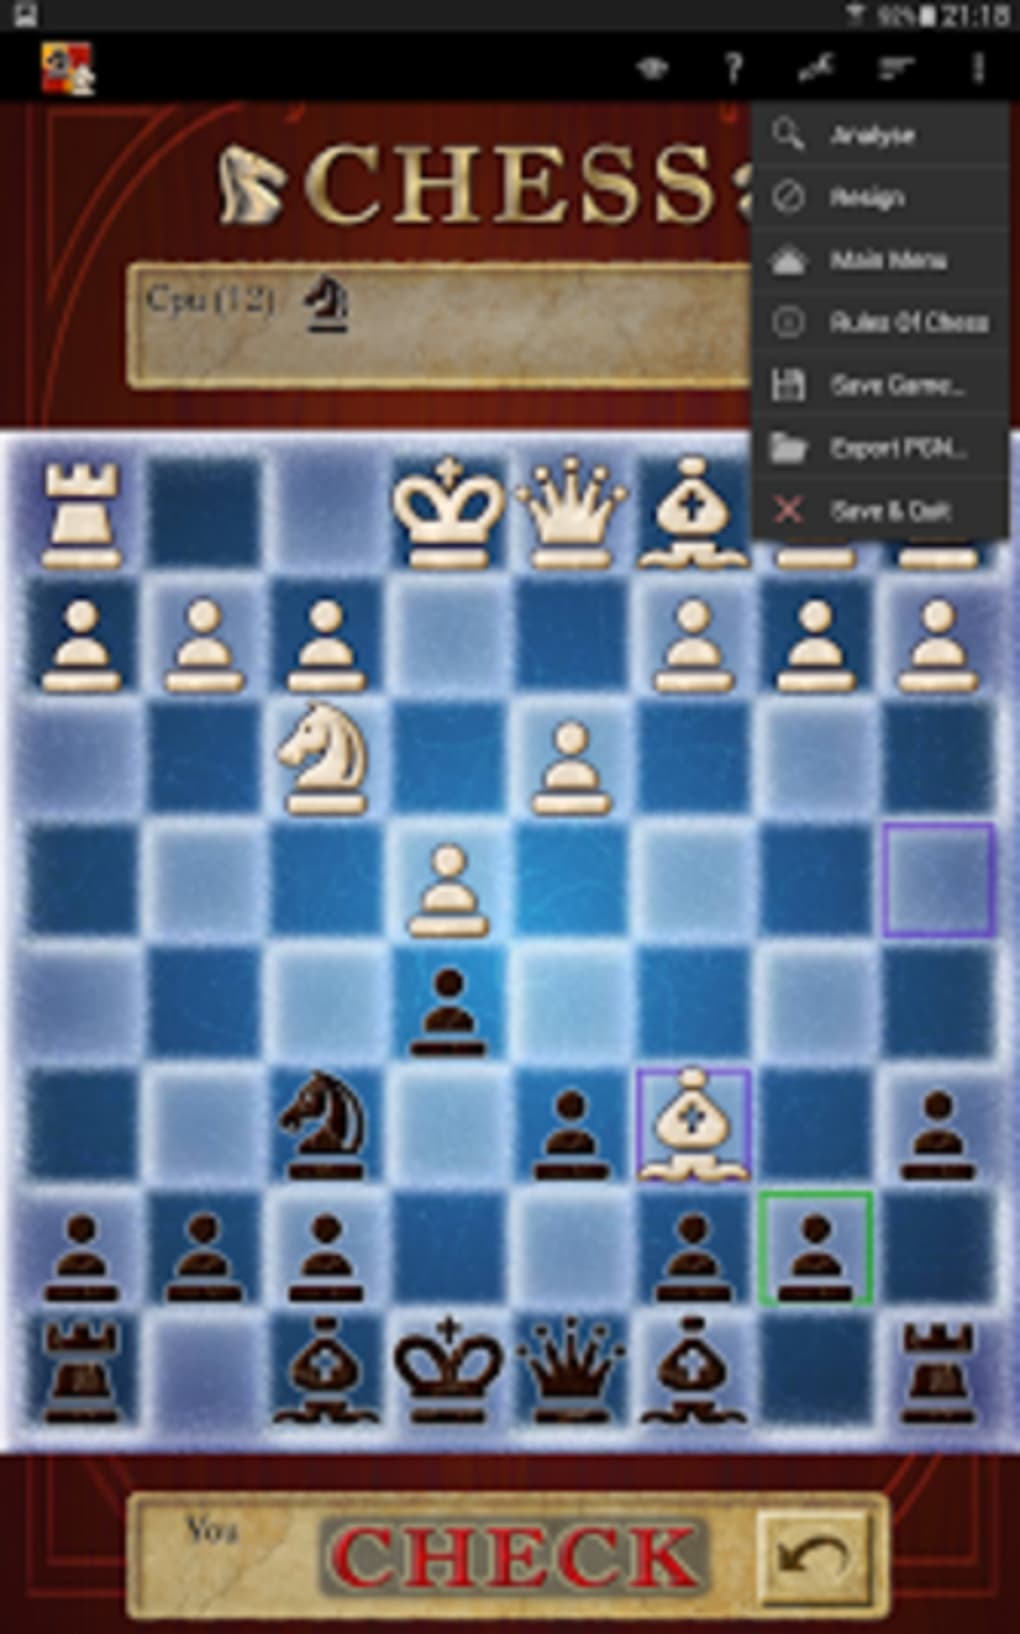 Chess Online Multiplayer instaling